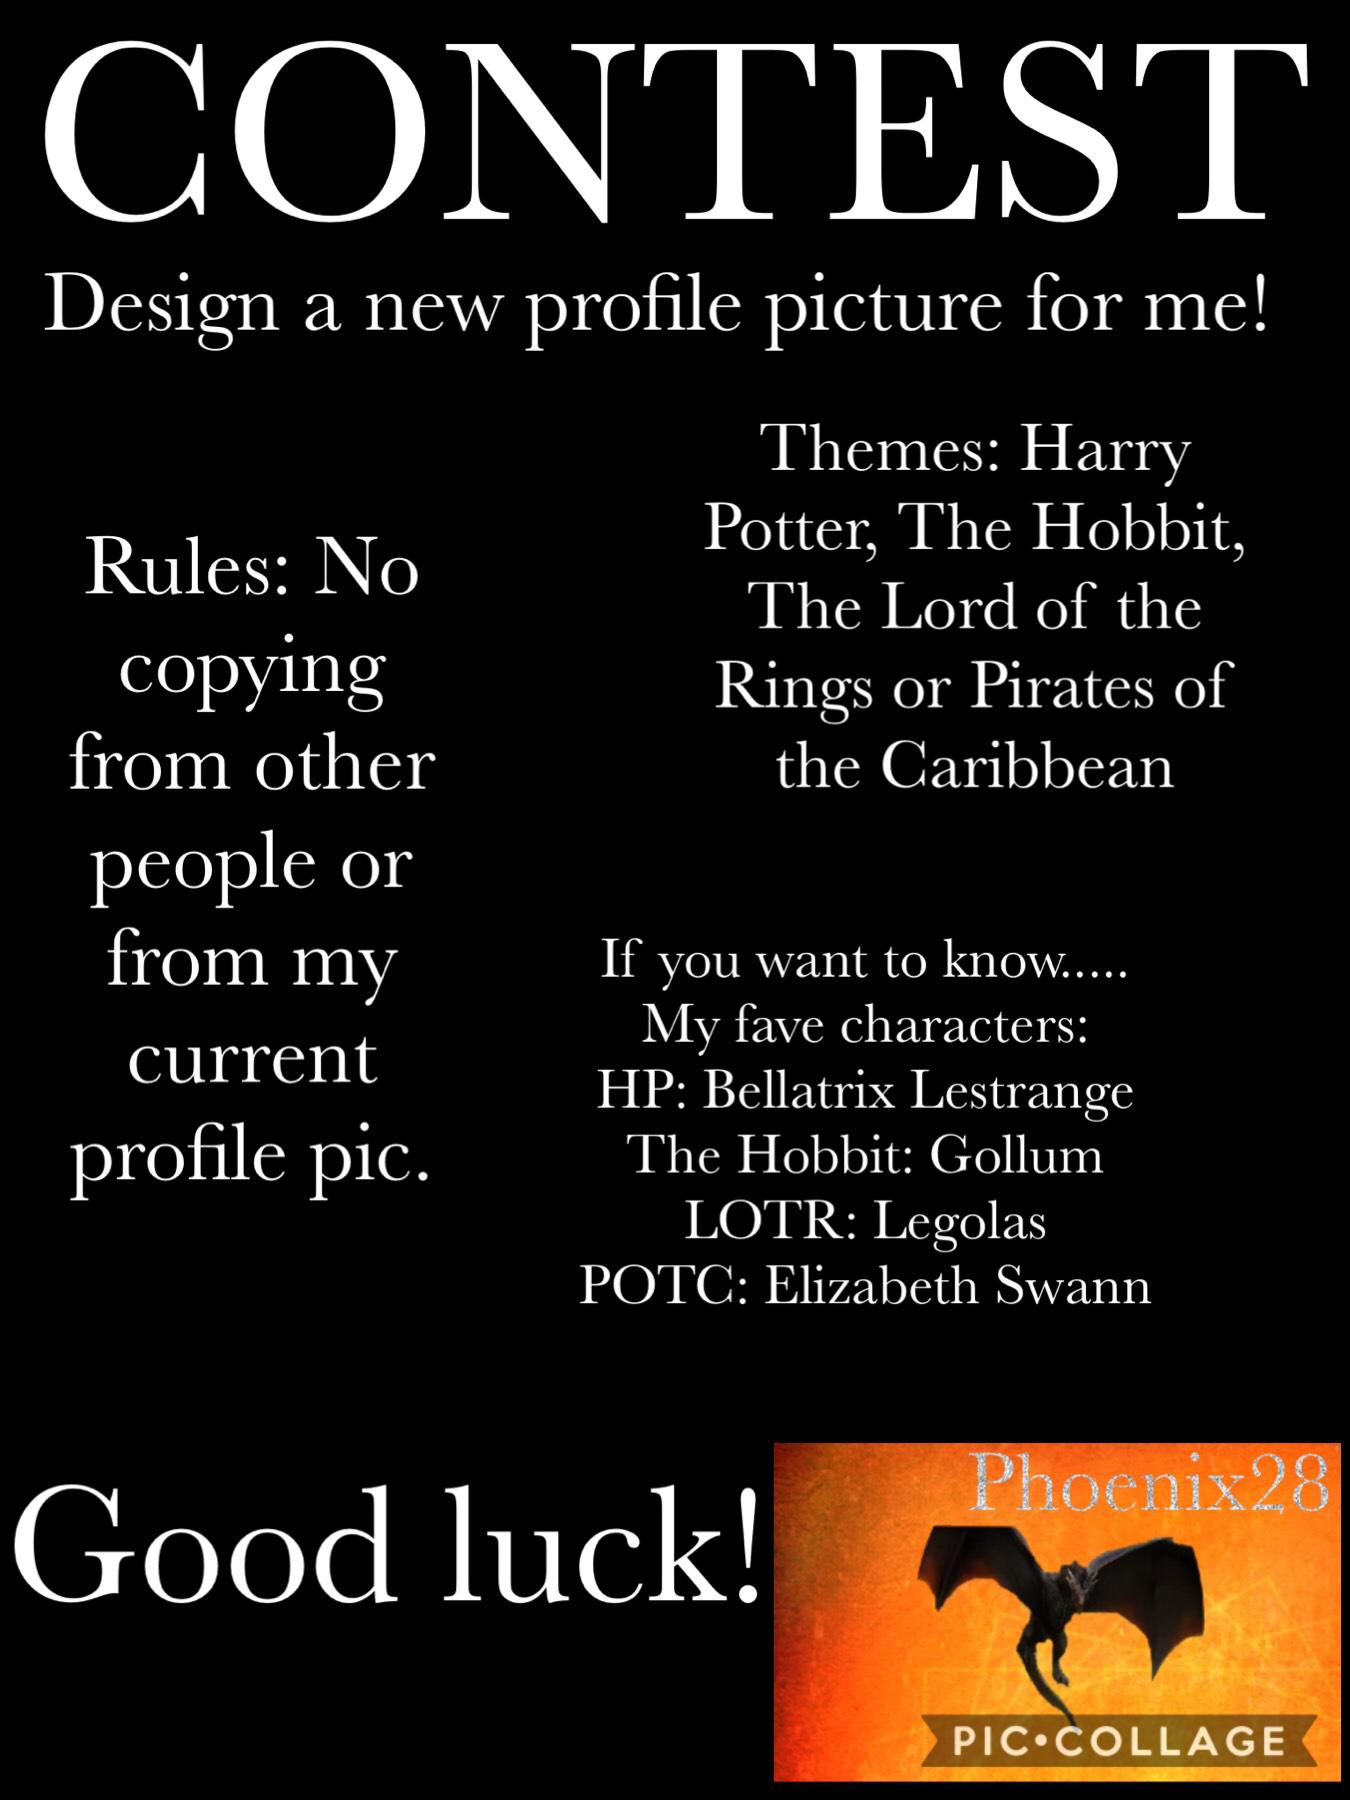 Contest, good luck!